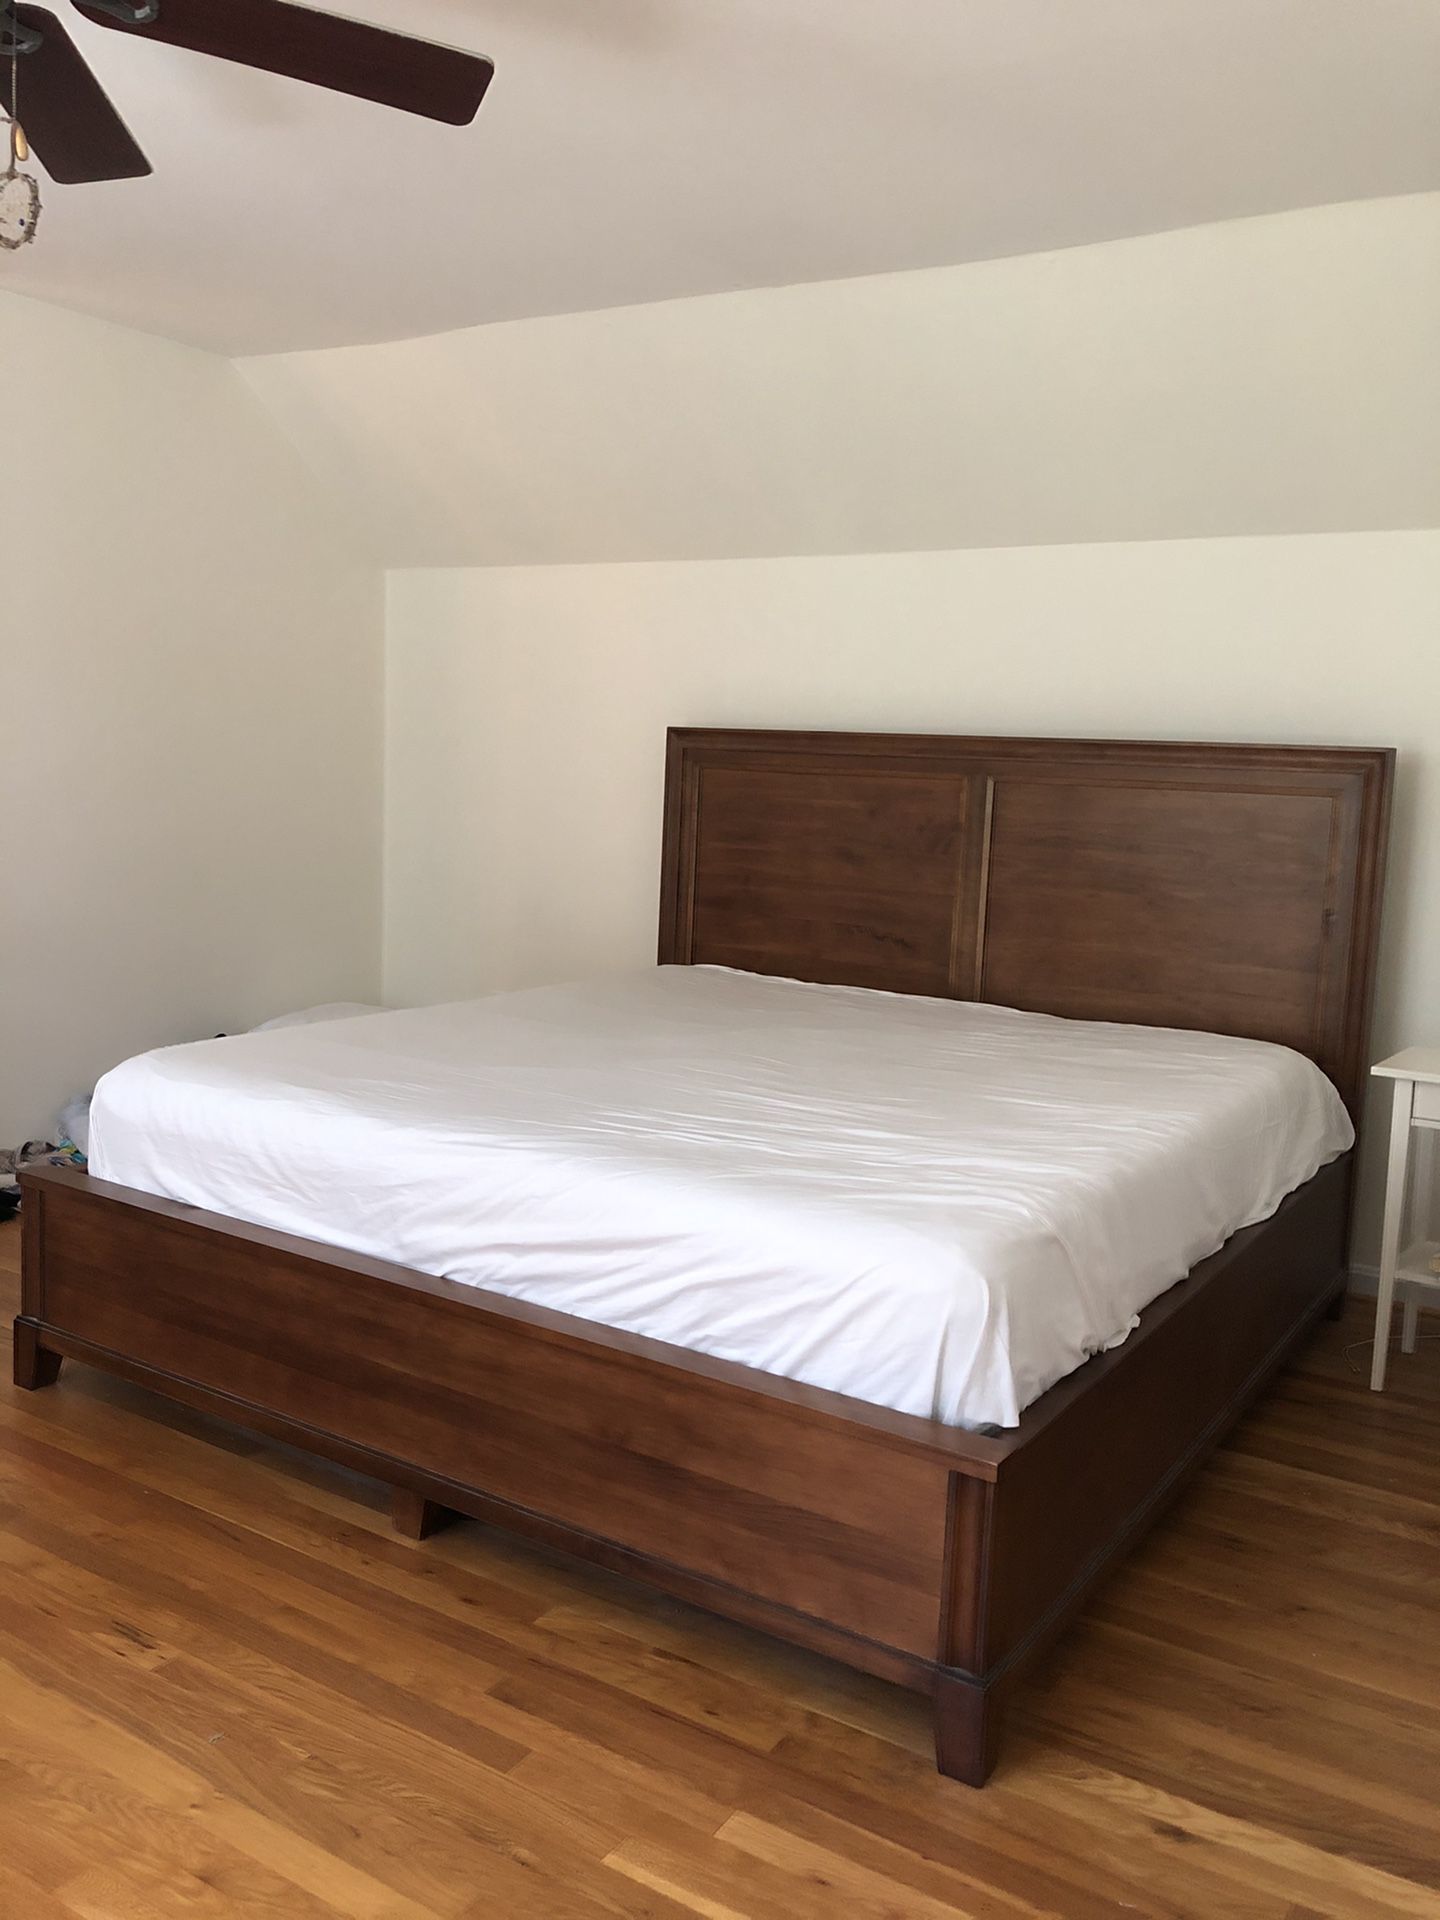 King size maple bed frame - solid wood